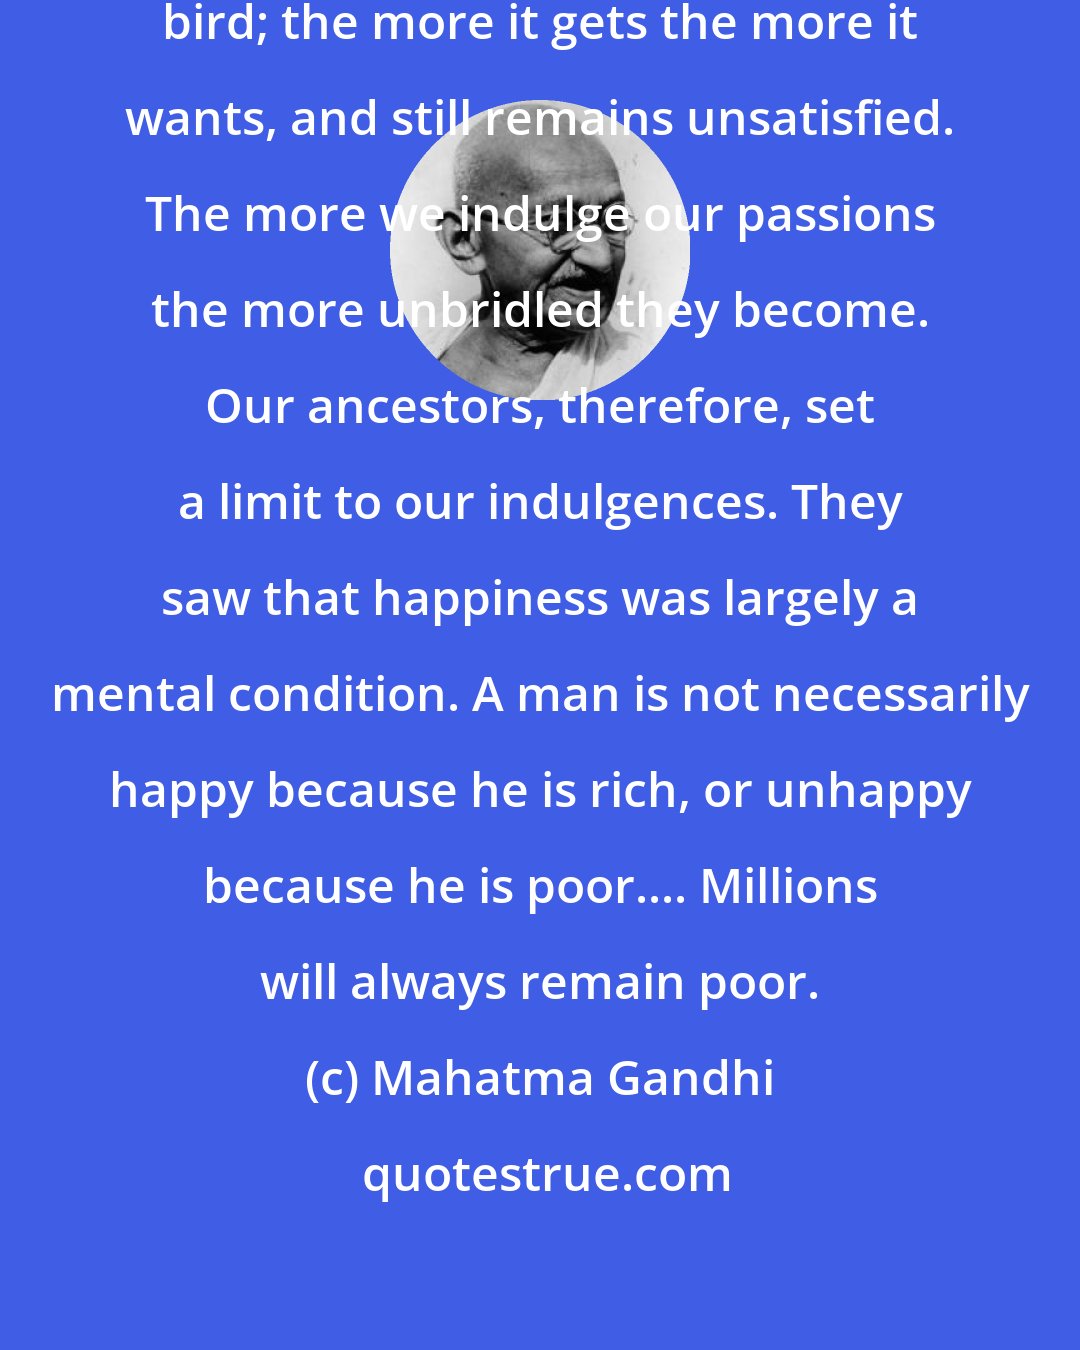 Mahatma Gandhi: We notice that the mind is a restless bird; the more it gets the more it wants, and still remains unsatisfied. The more we indulge our passions the more unbridled they become. Our ancestors, therefore, set a limit to our indulgences. They saw that happiness was largely a mental condition. A man is not necessarily happy because he is rich, or unhappy because he is poor.... Millions will always remain poor.